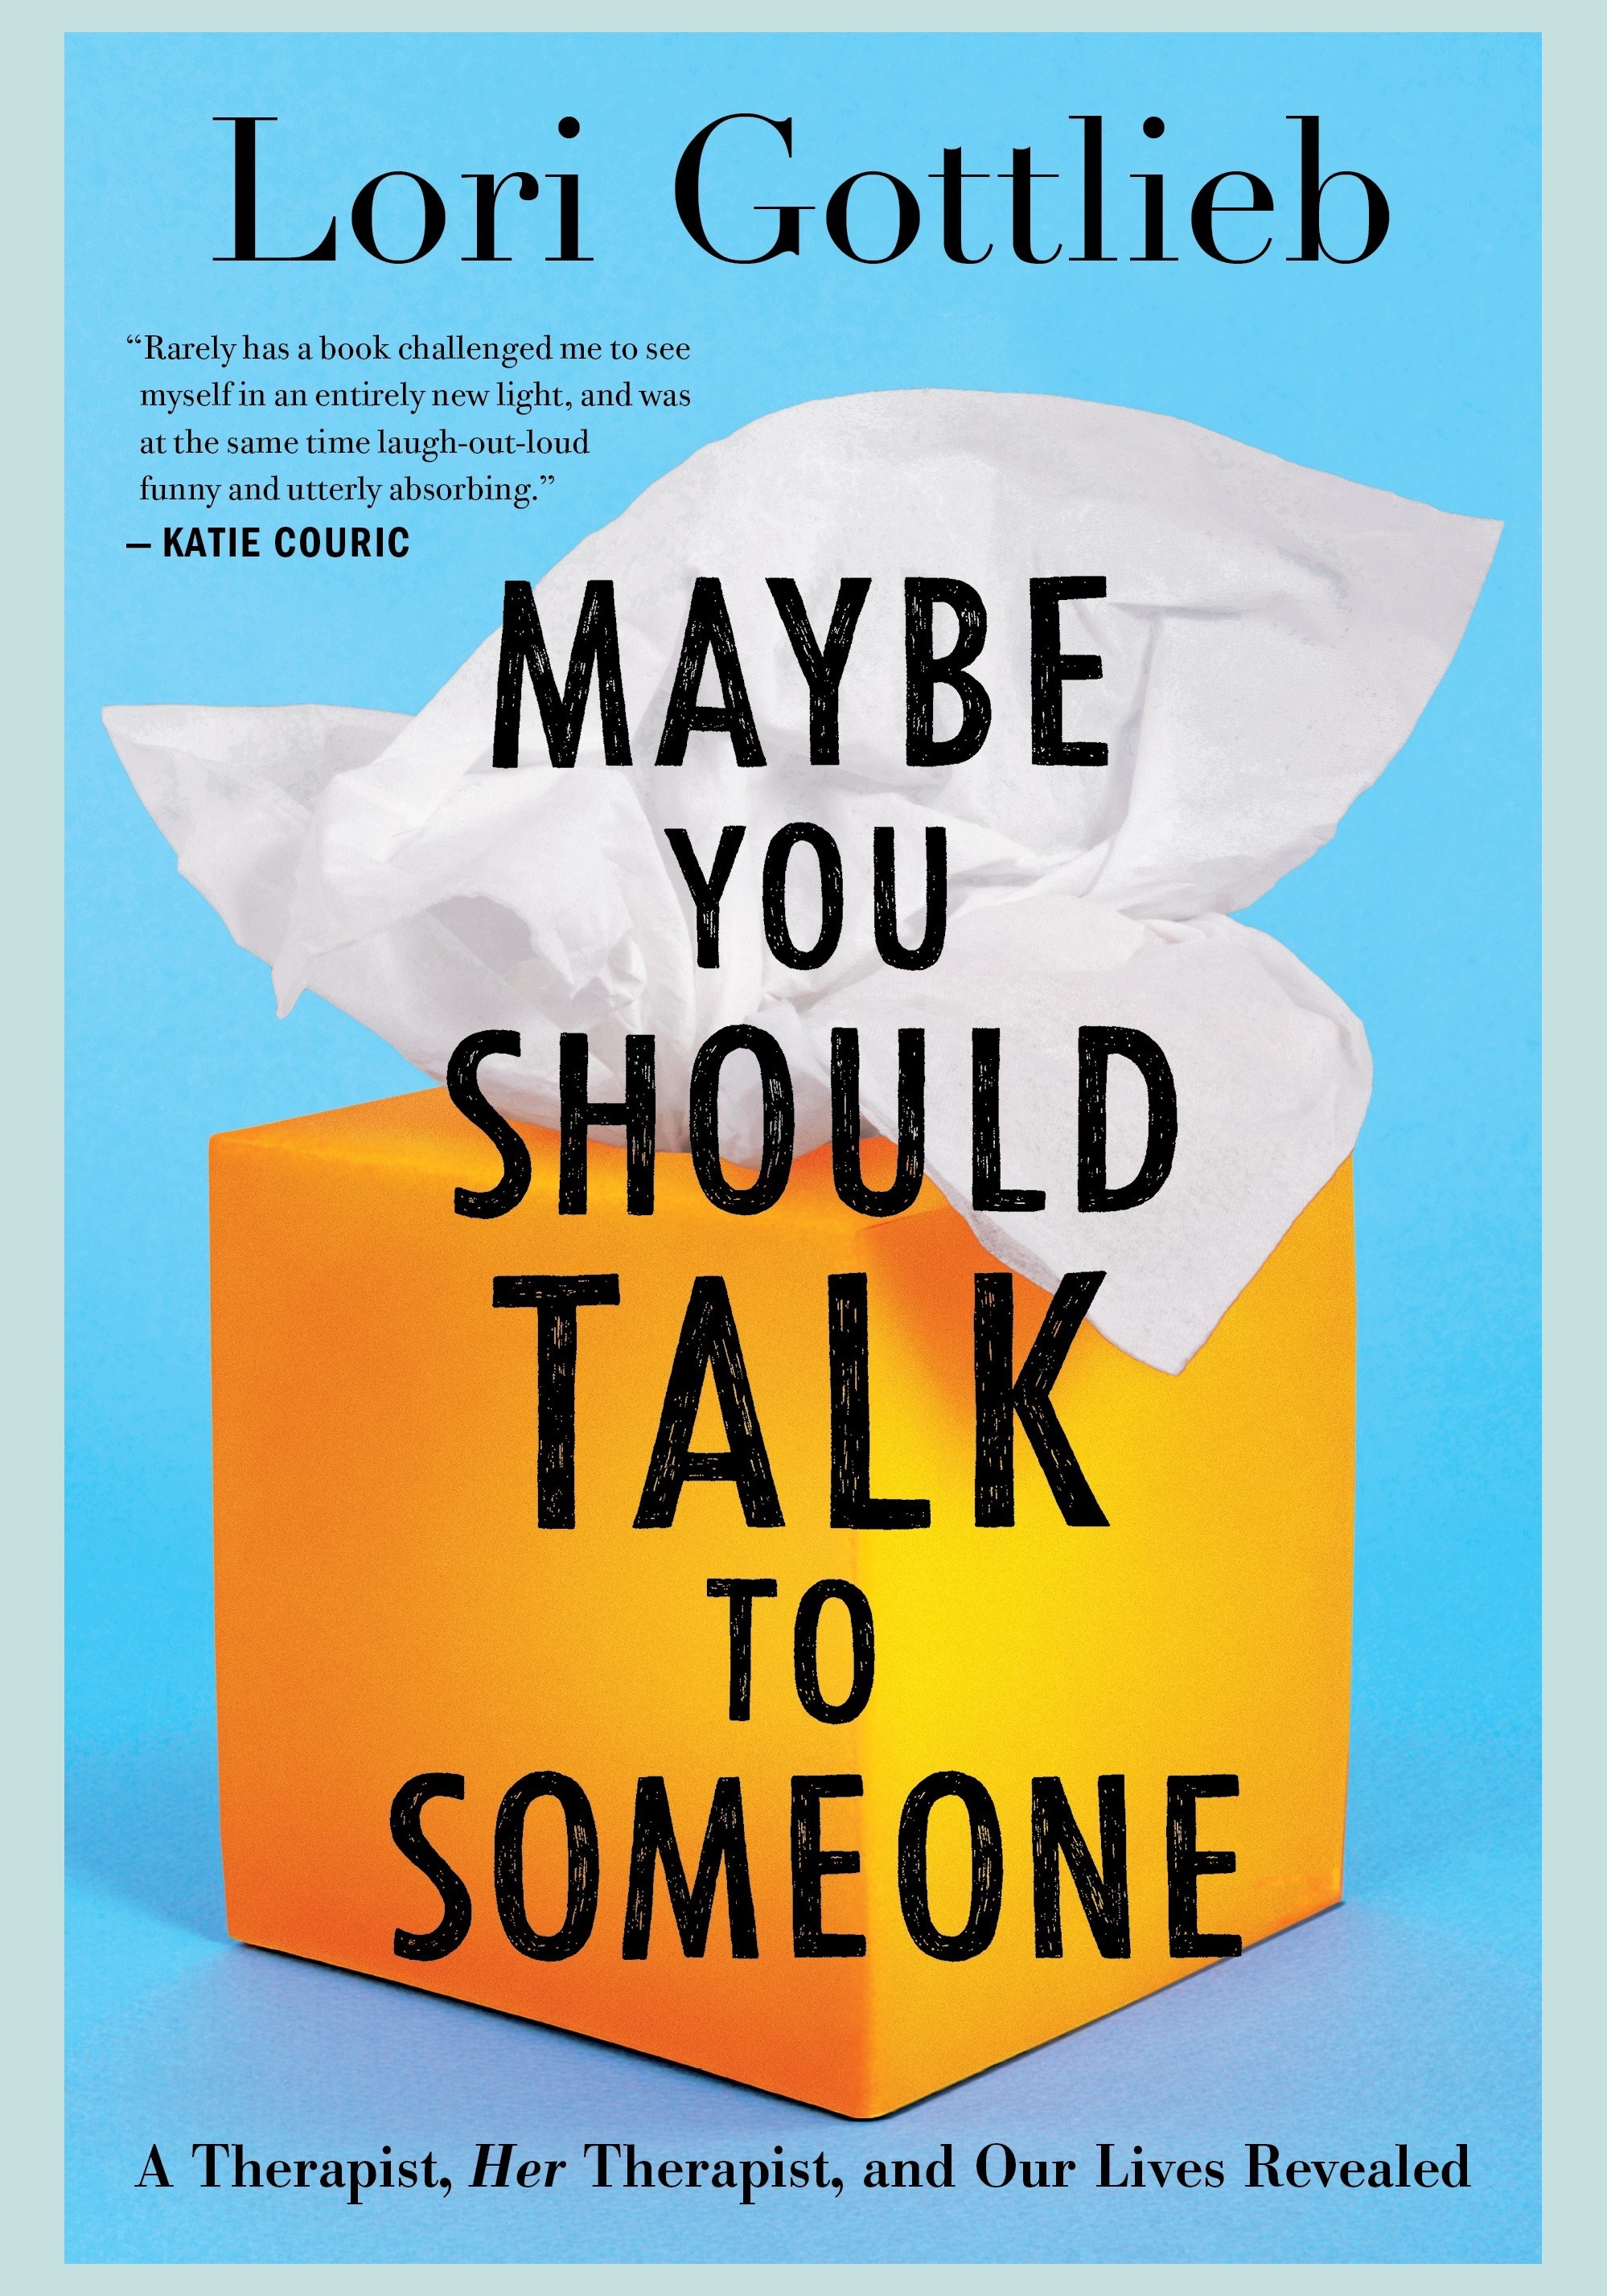 &quot;Maybe You Should Talk to Someone&quot; by Lori Gottlieb